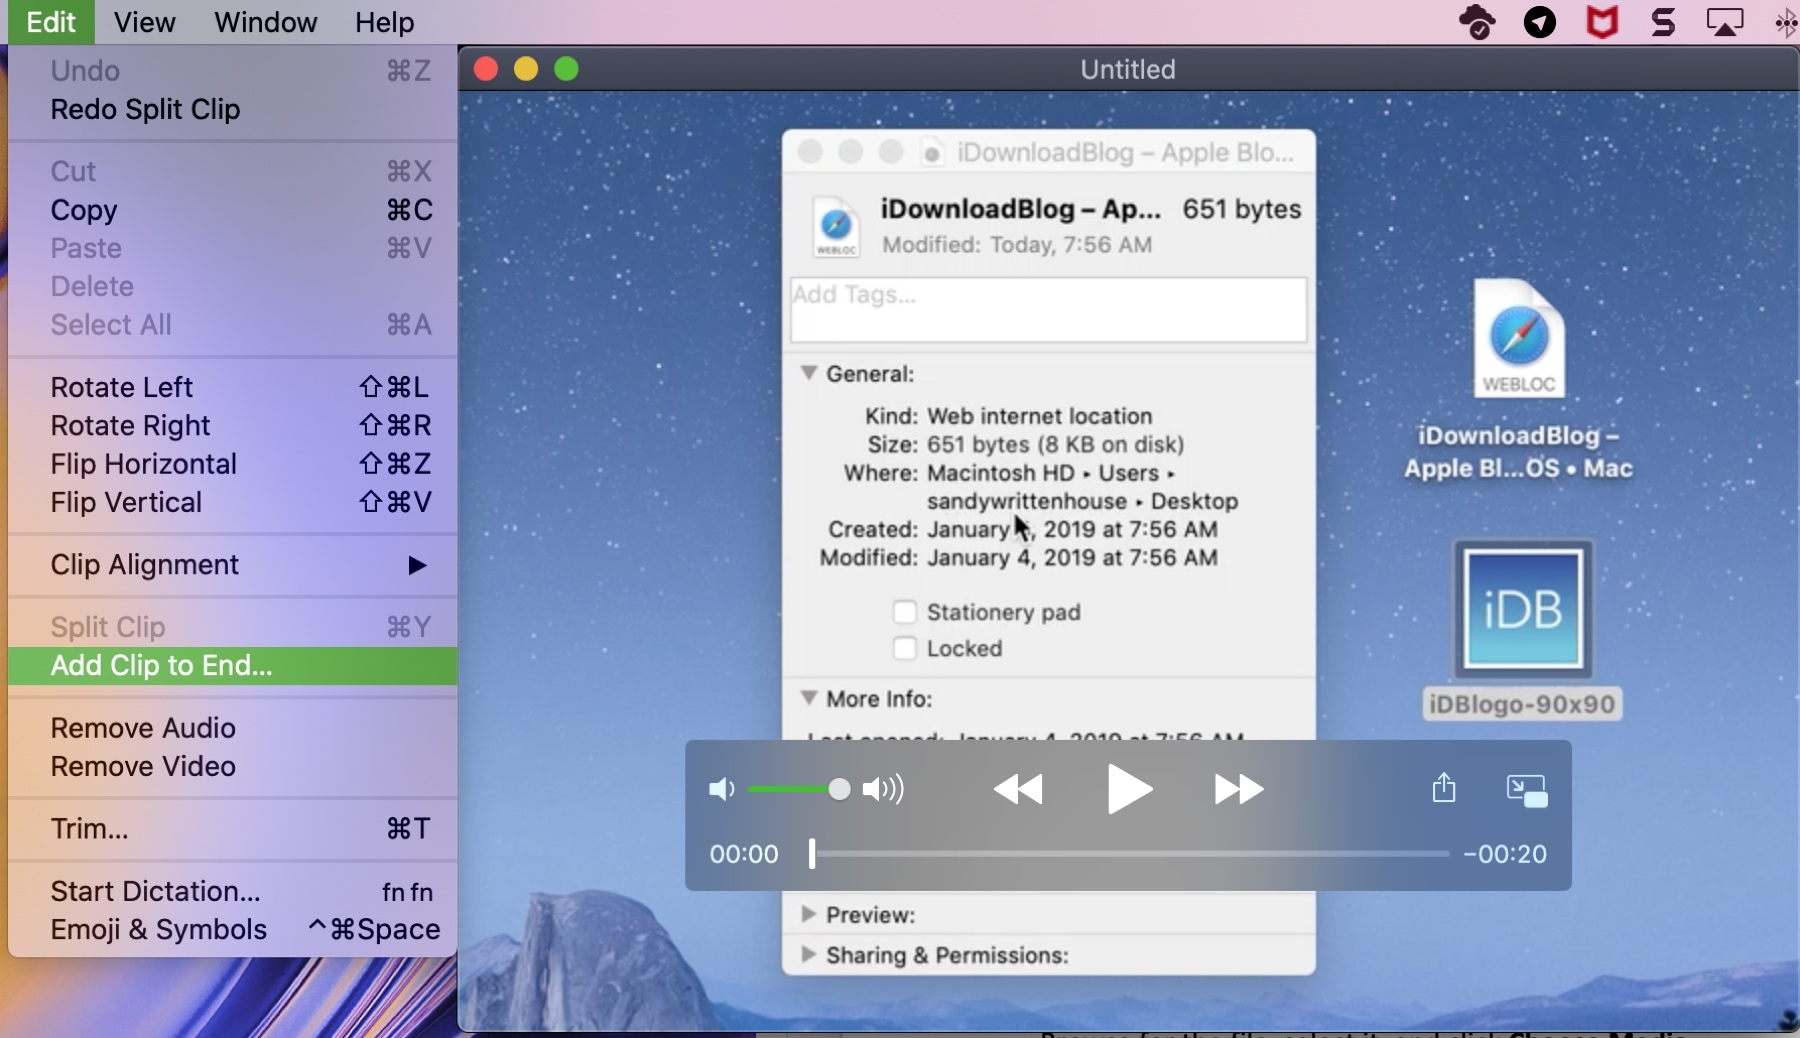 quicktime player for mac video playlist